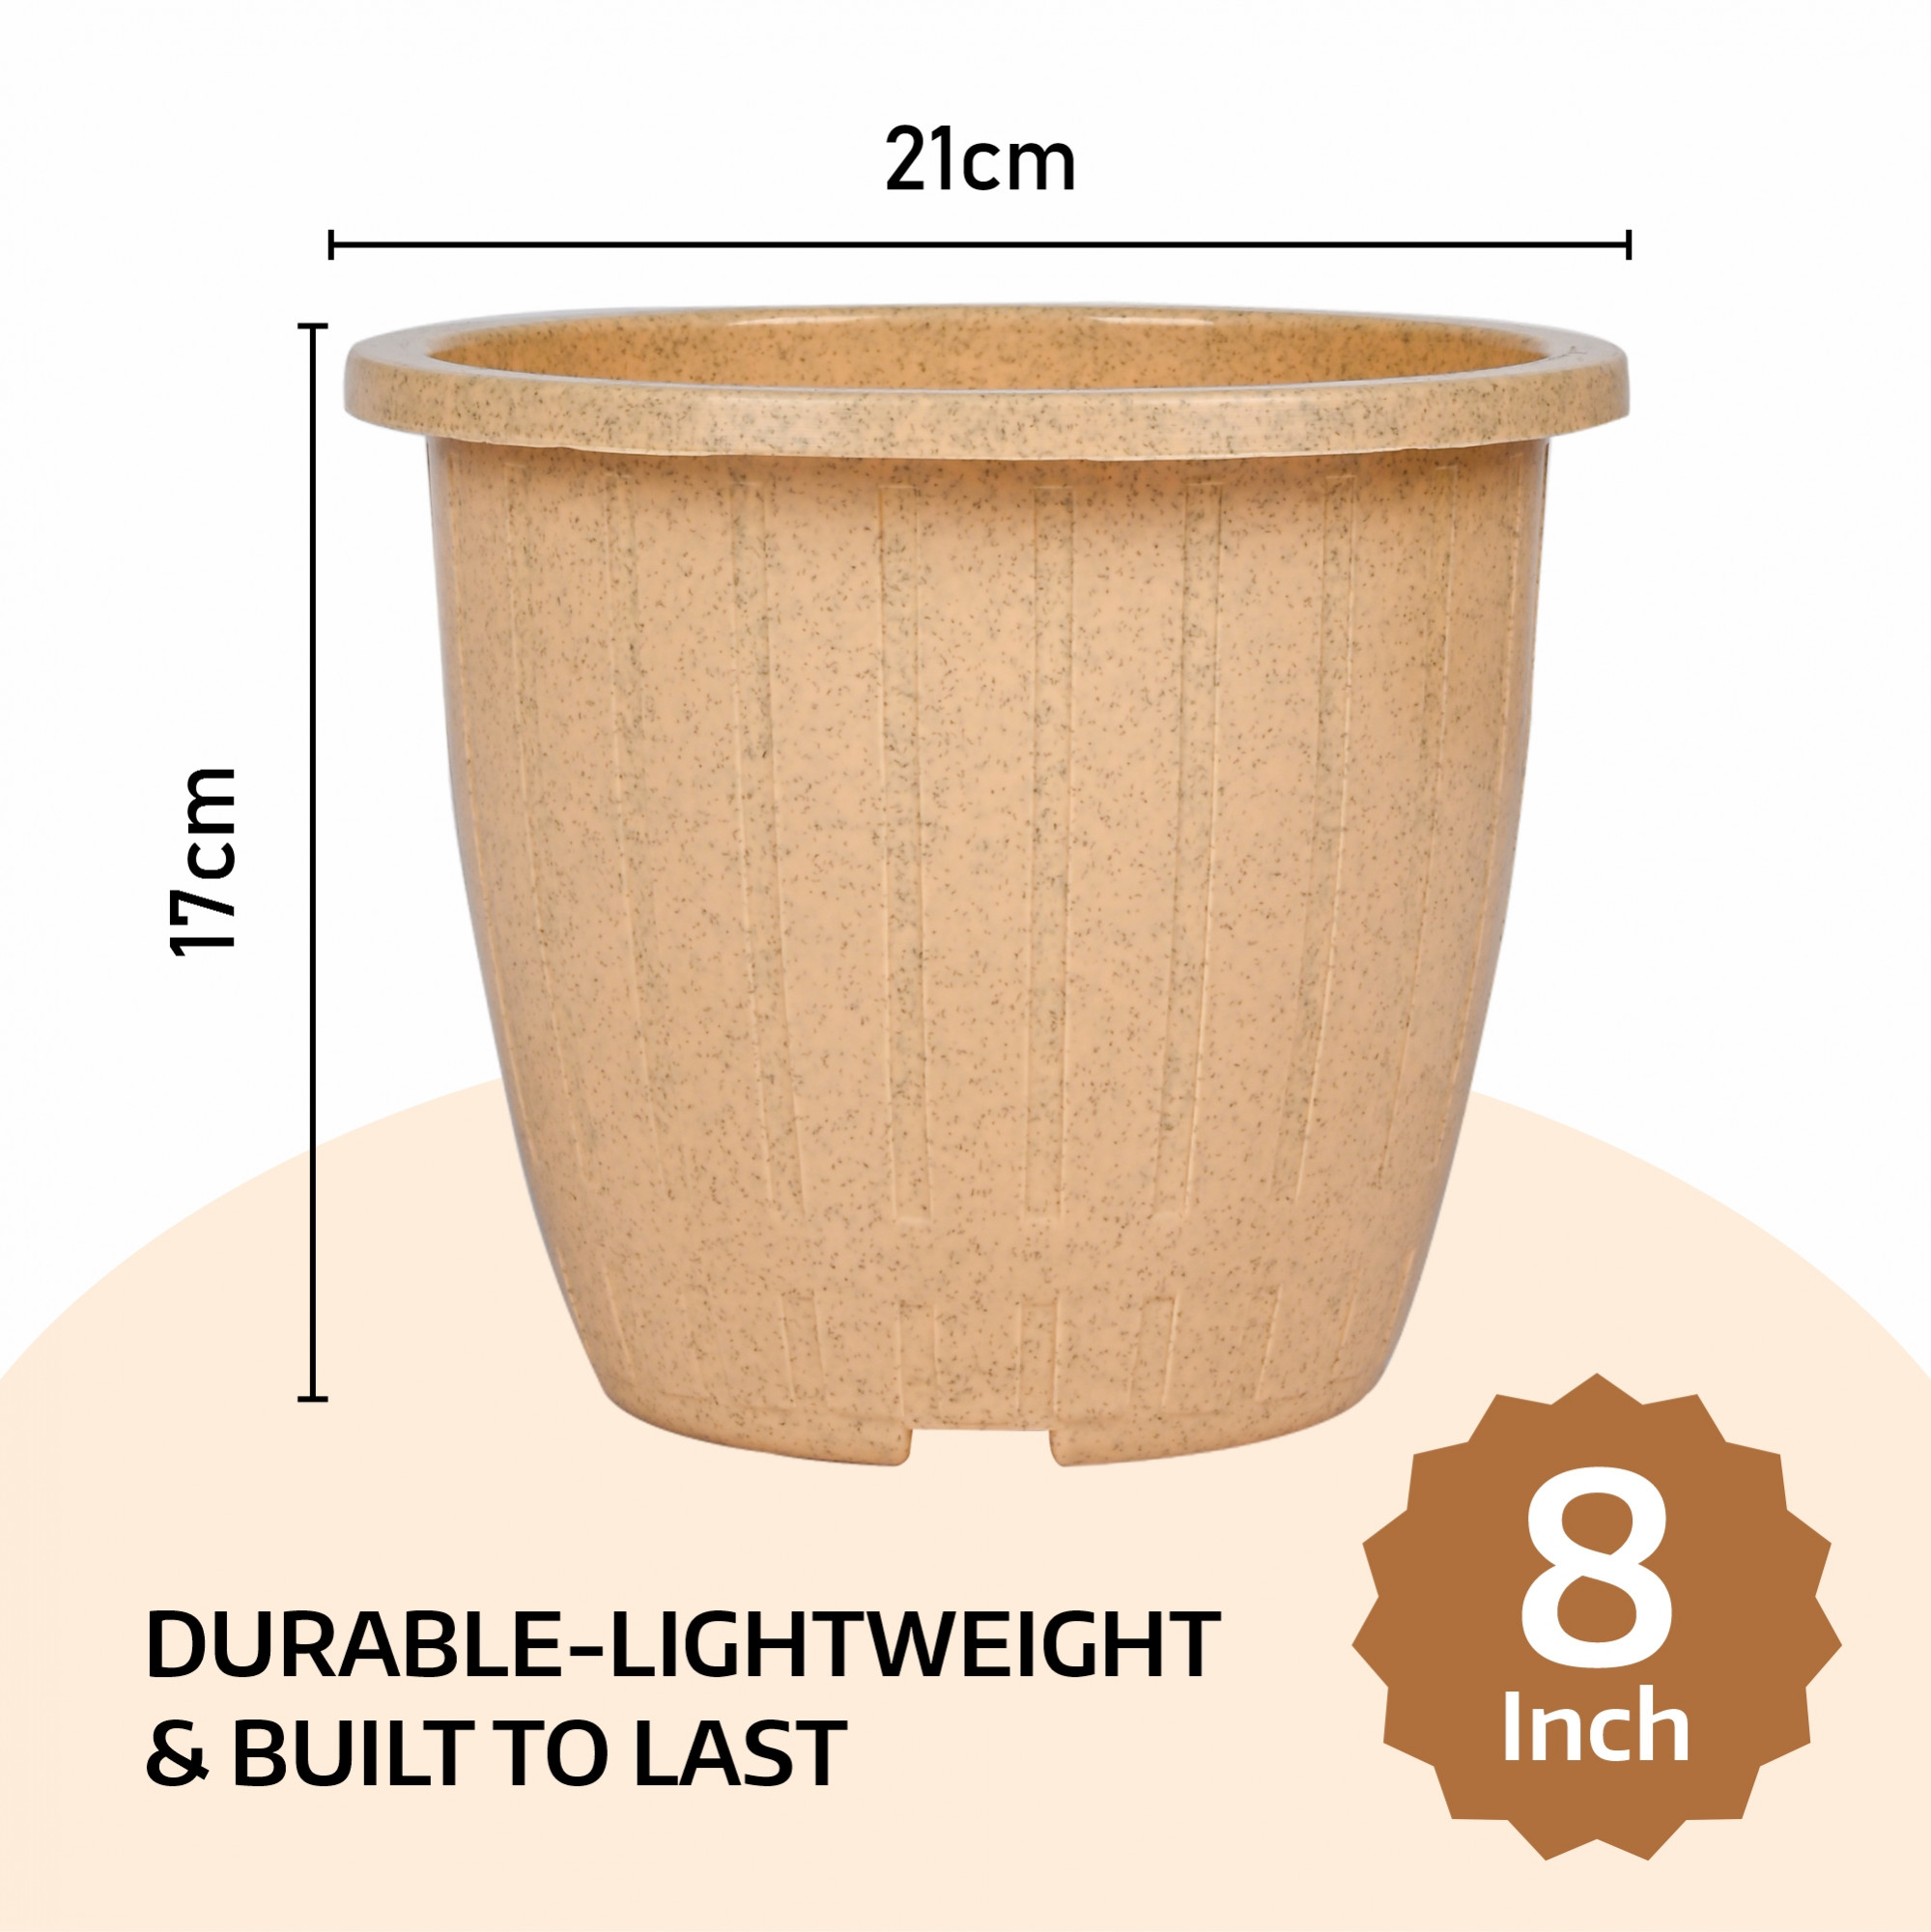 Kuber Industries Flower Pot | Flower Pot for Living Room | Planters for Home-Lawns & Gardening | Window Flower Pots for Balcony | Marble Duro | 8 Inch | White & Beige